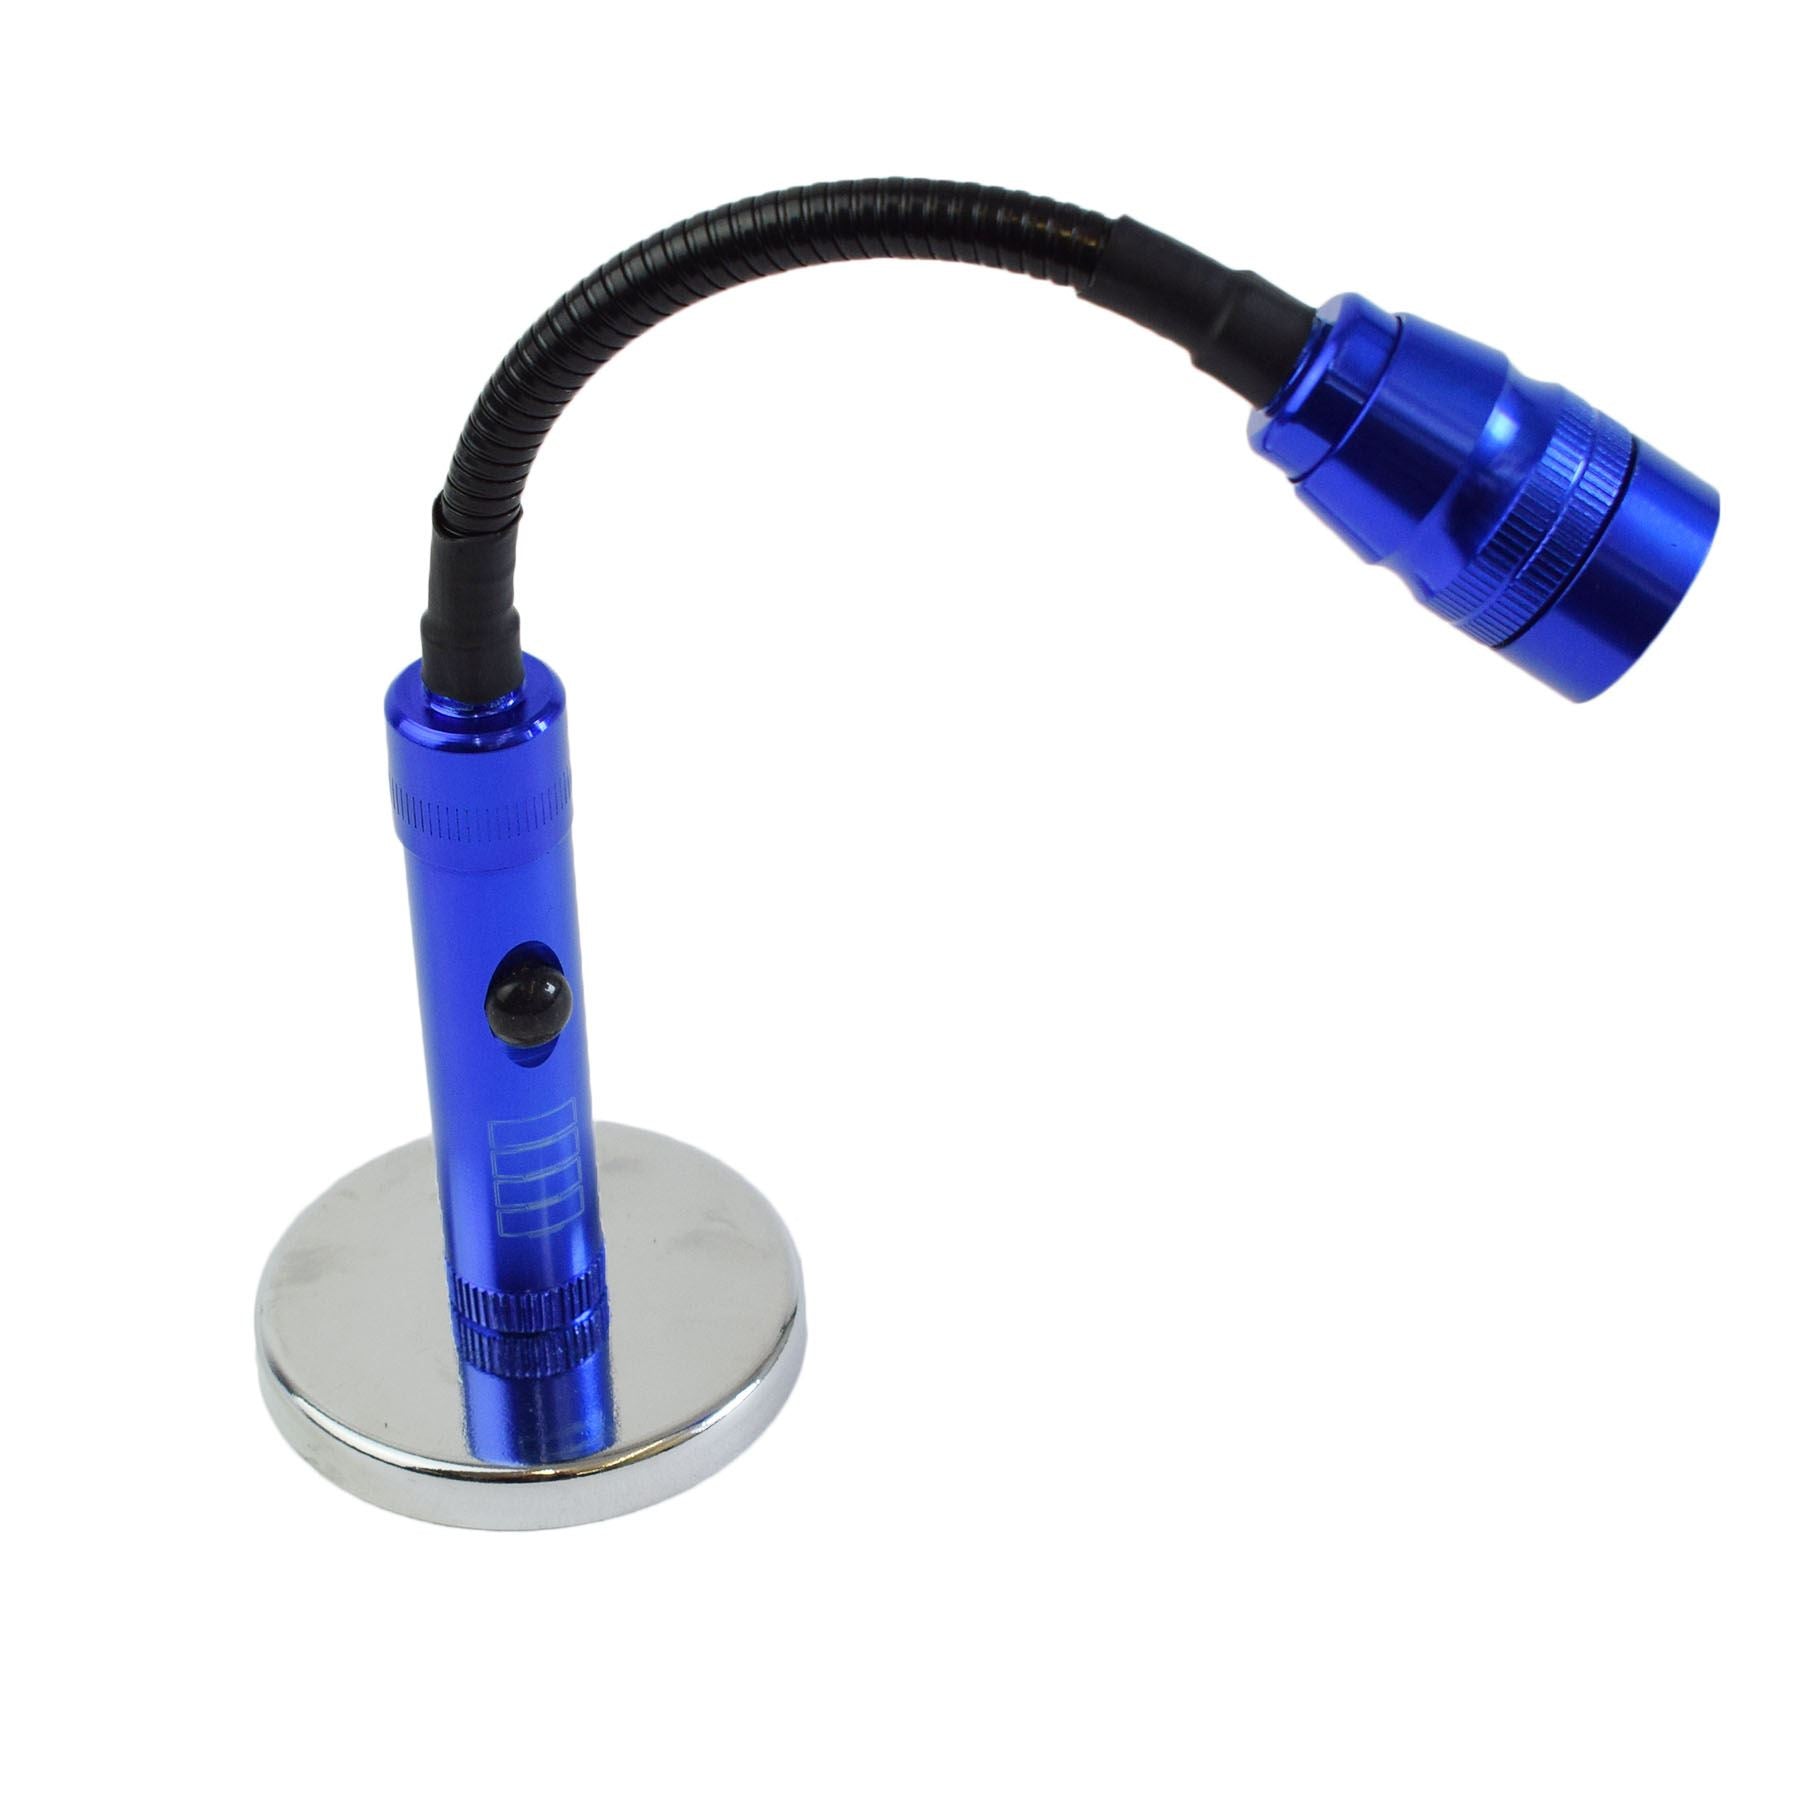 Flexible Work Inspection Flash Light Torch 3 LED With Magnetic Base